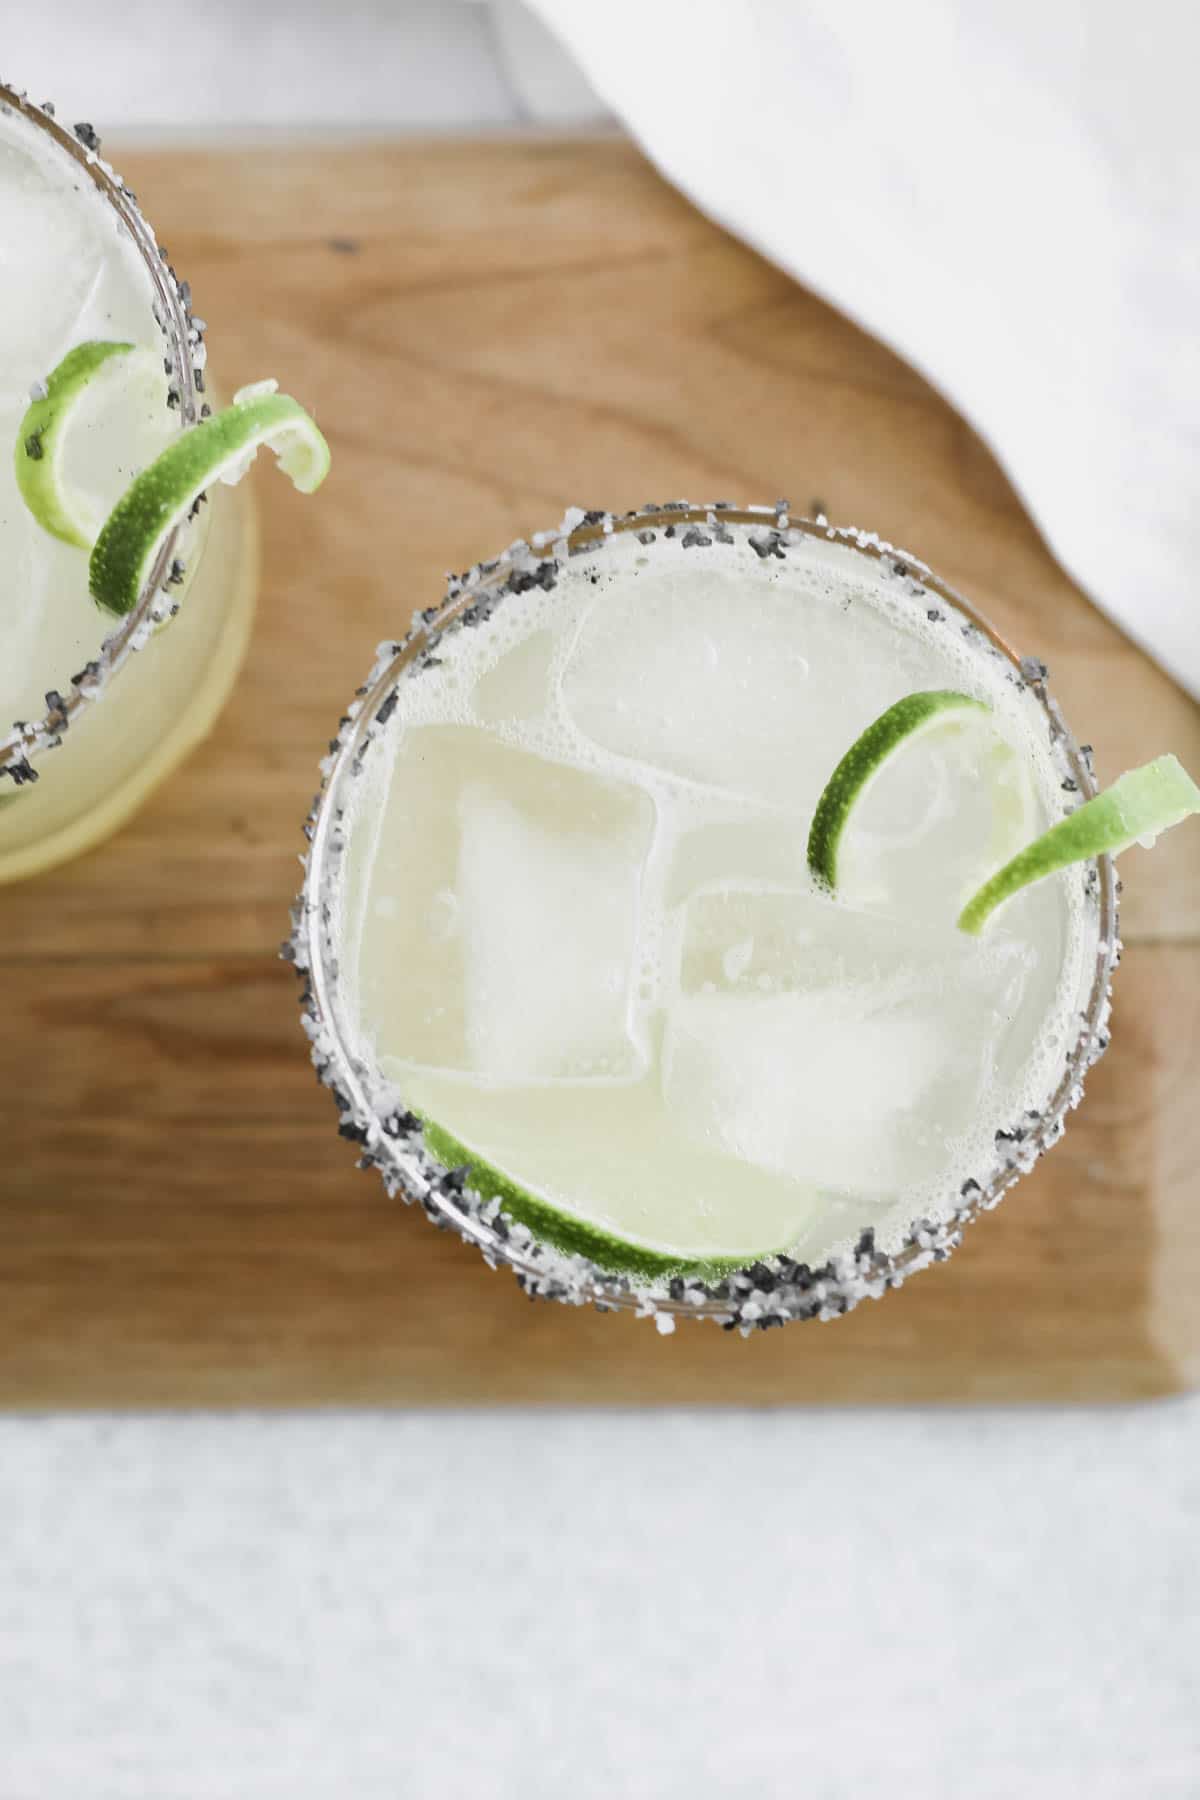 Skinny Topo Chico Margaritas in glasses with salted rim and a curled lime peel slice garnish.